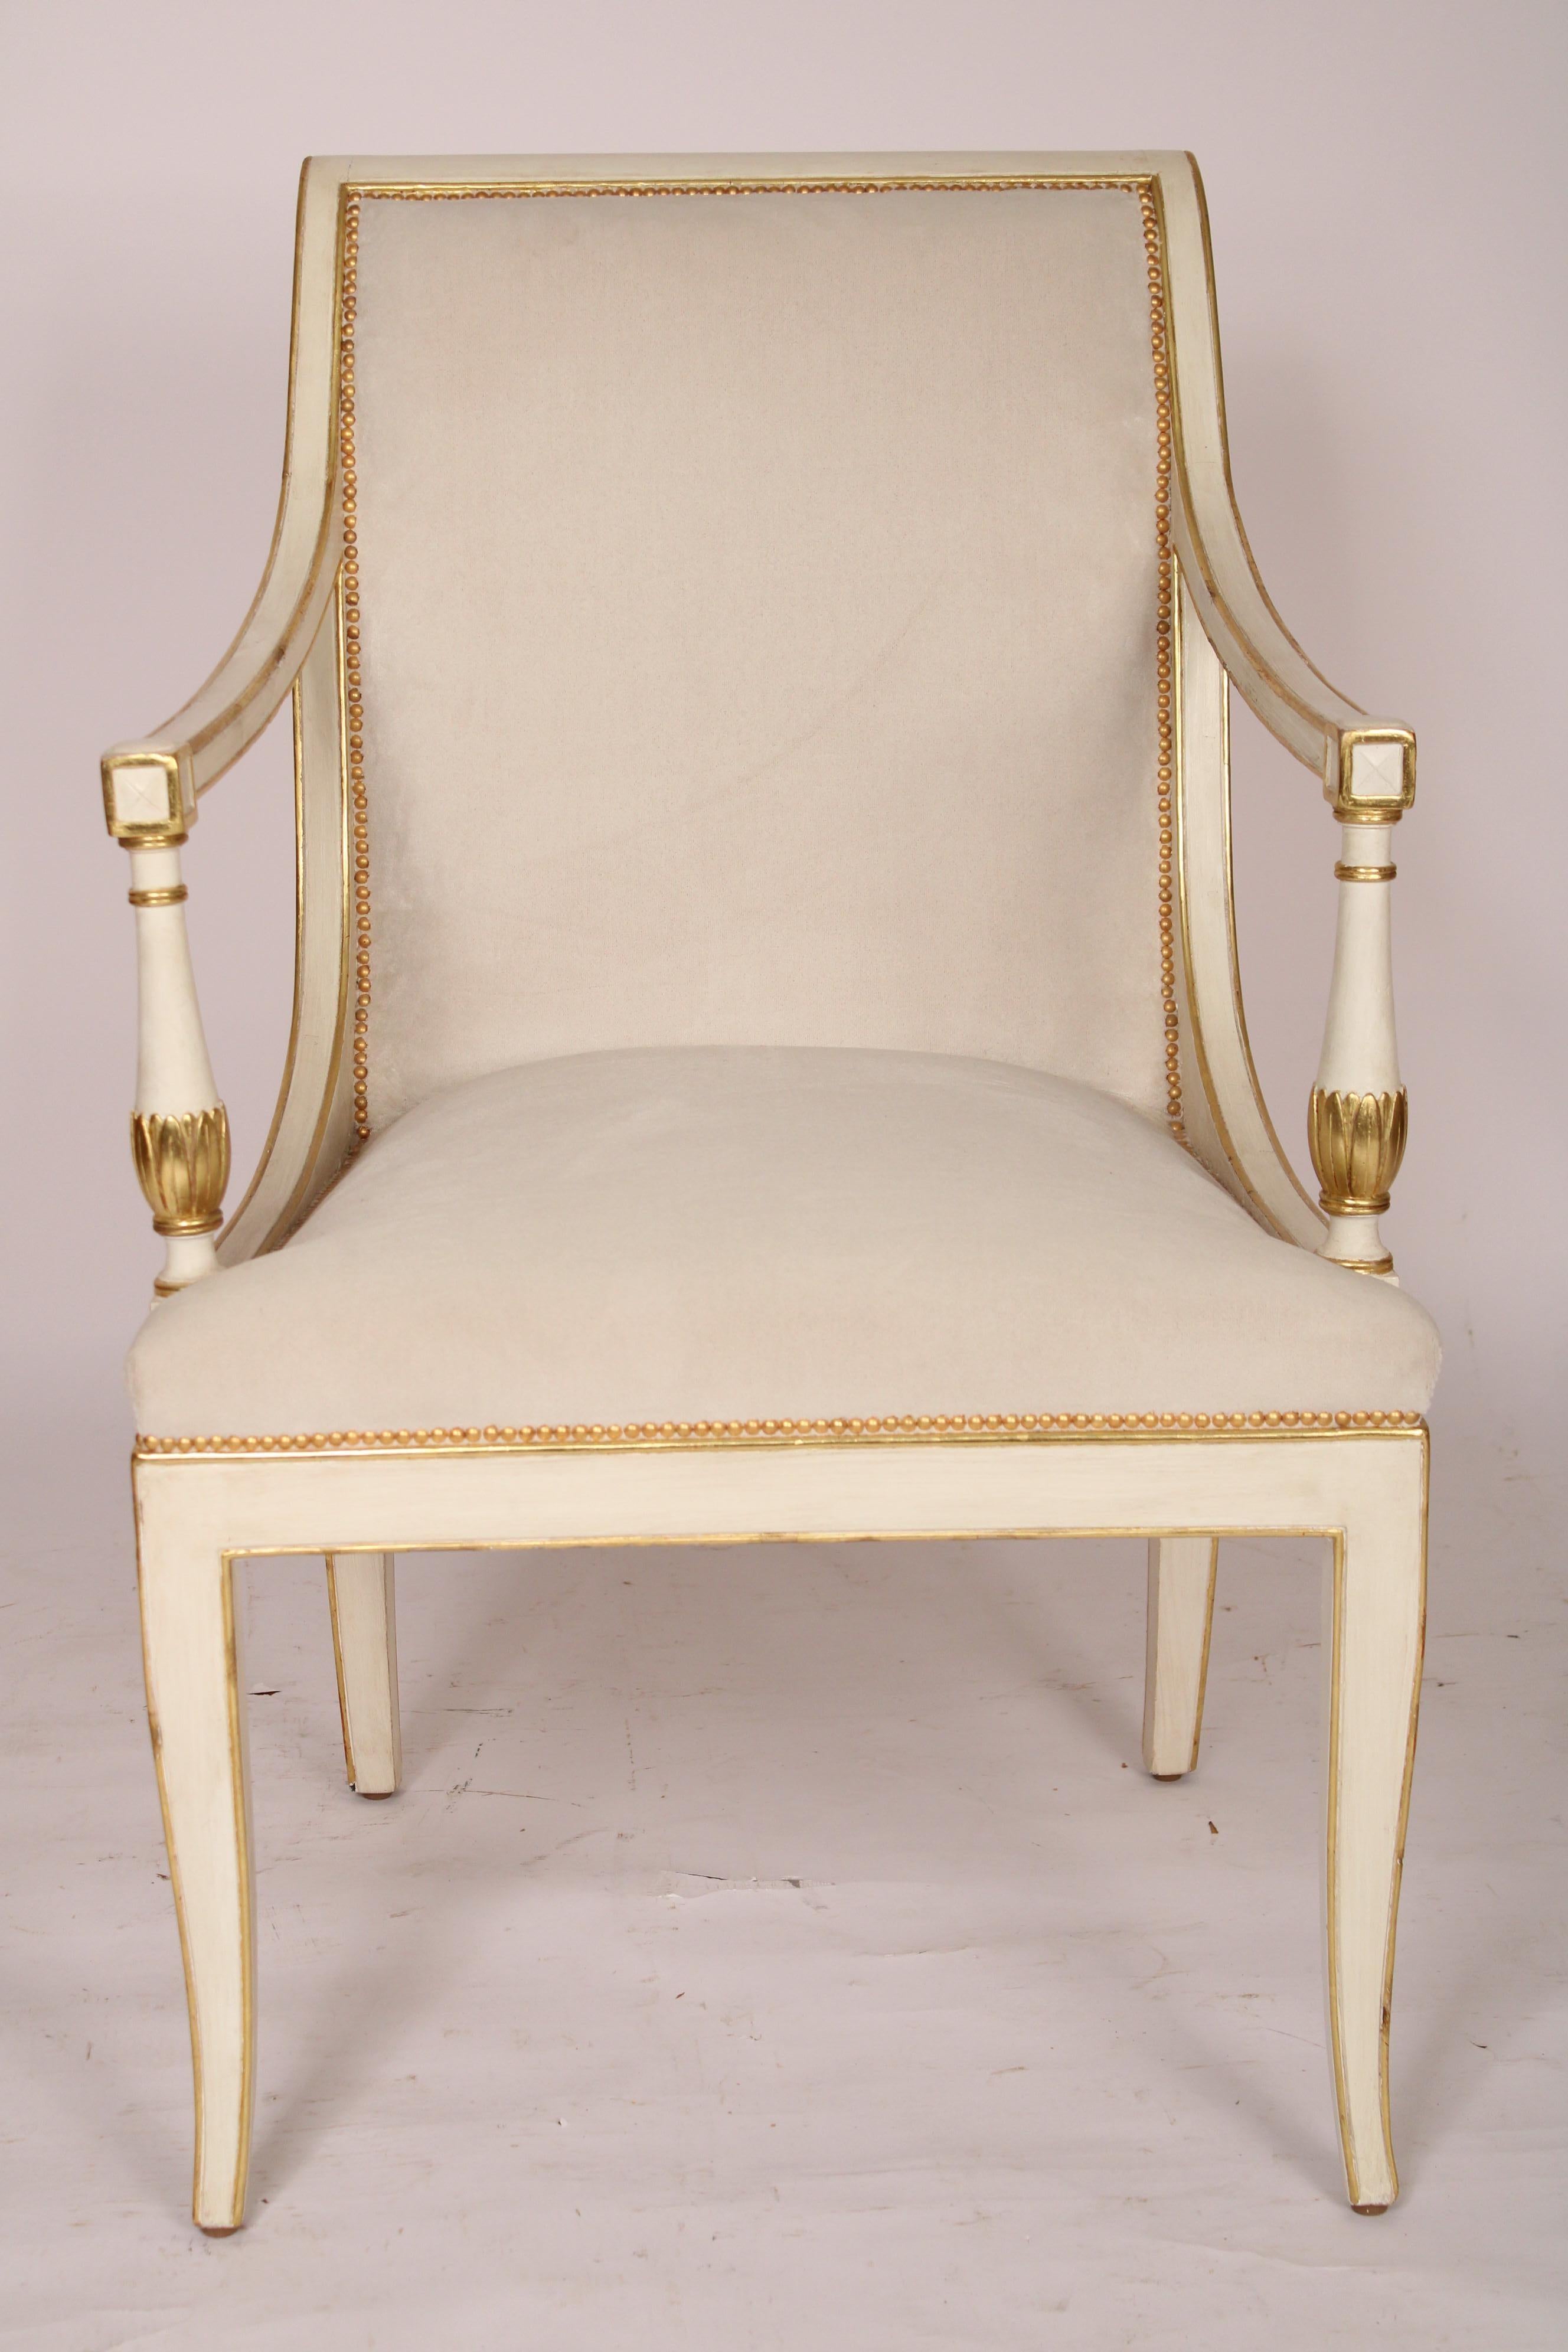 Neoclassical Pair of Neo Classical Style Painted and Gilt Decorated Armchairs For Sale